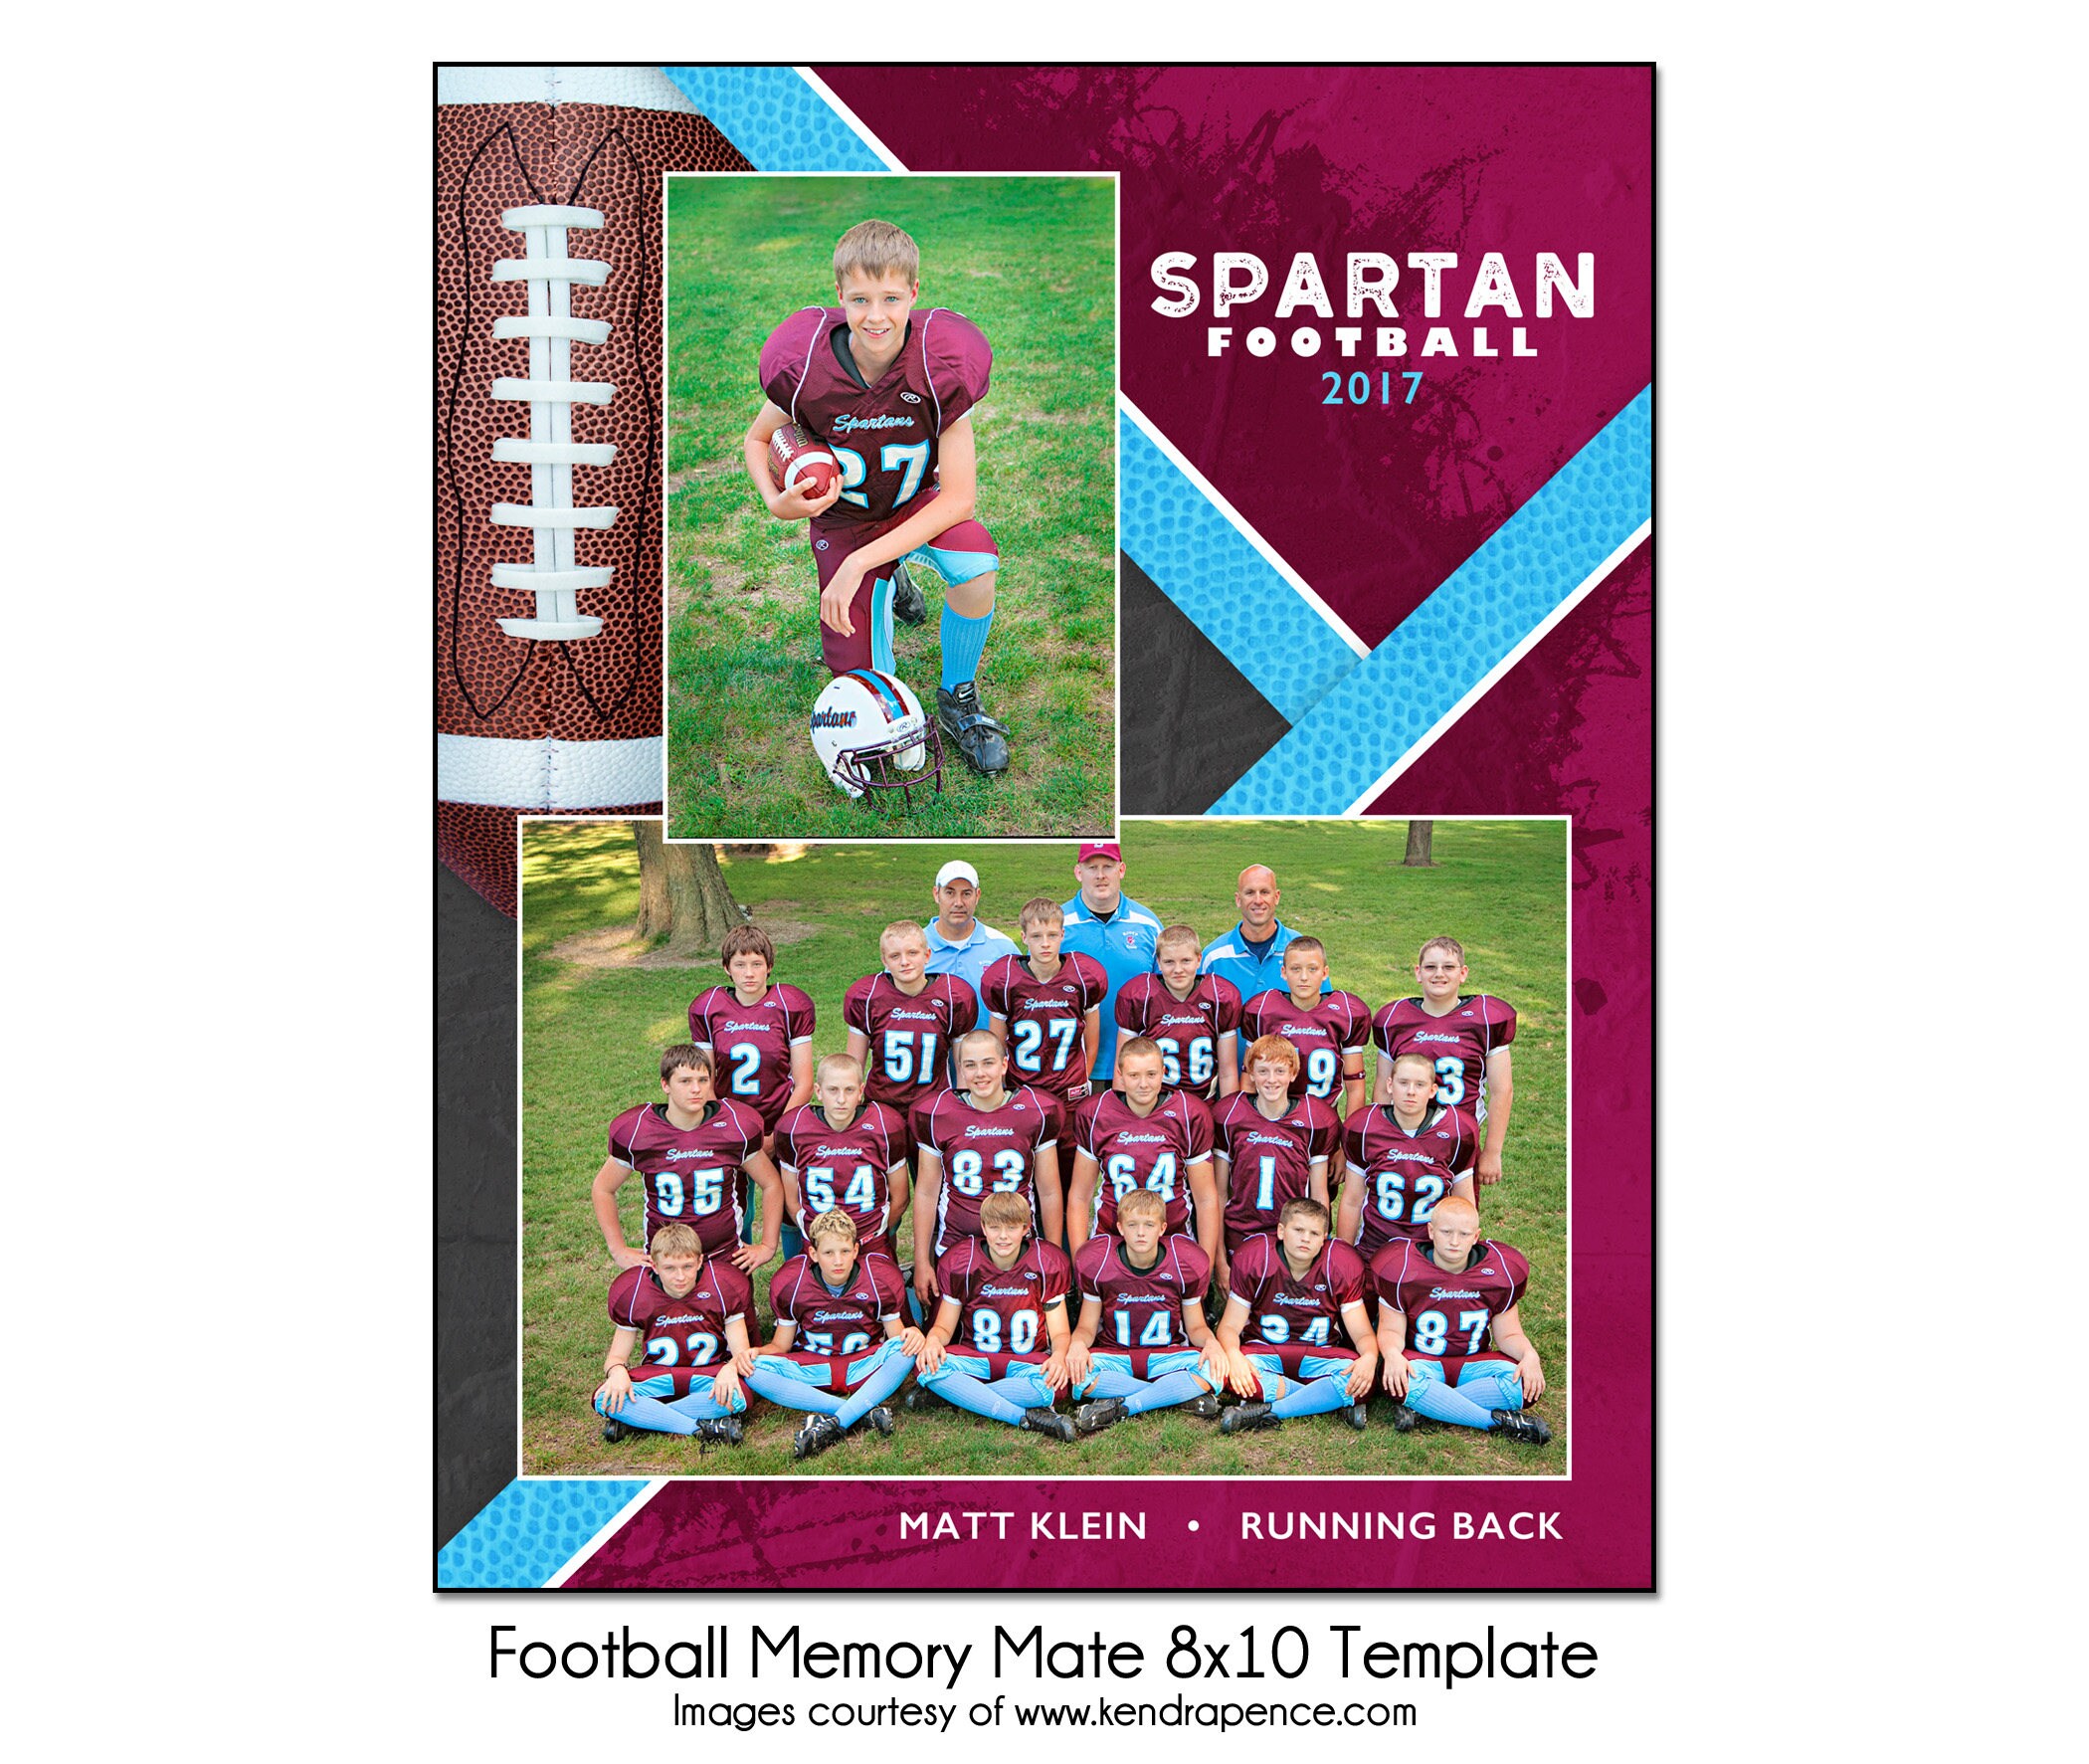 2020-football-memory-mate-sports-template-for-photoshop-pig-etsy-photoshop-template-design